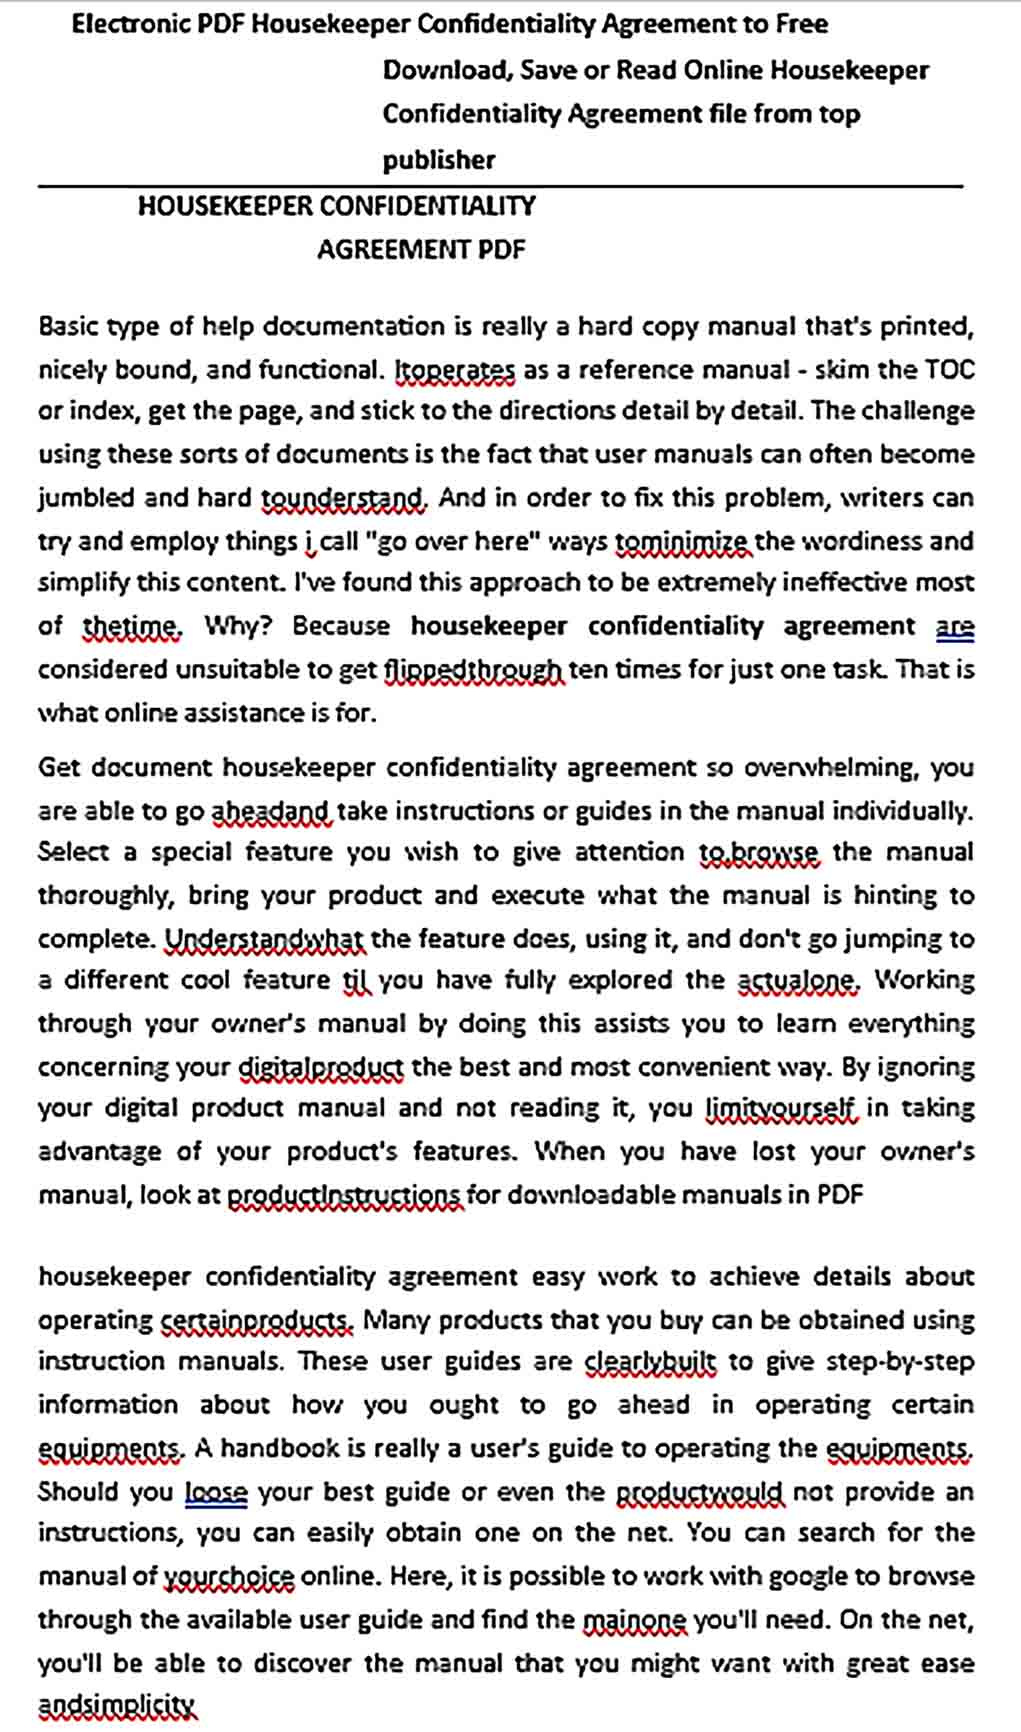 Sample Celebrity Confidentiality Agreement for Housekeeper